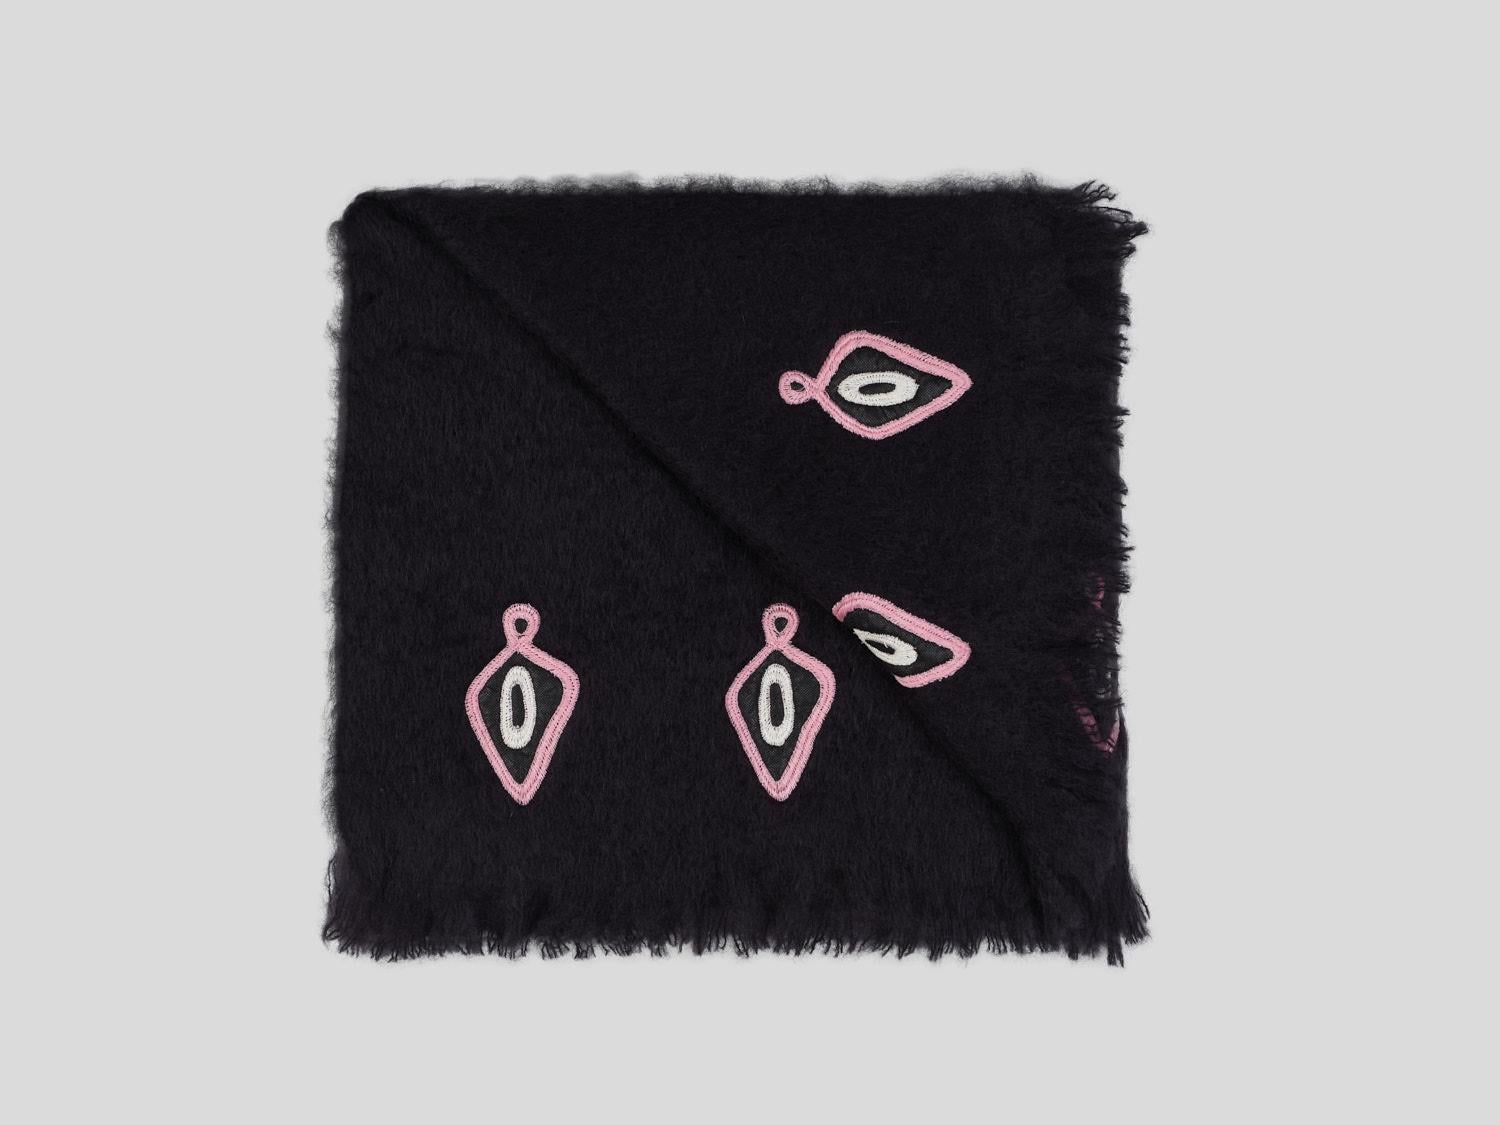 Omaka, a graphic black blanket made of the finest New Zealand mohair. This throw is embellished with pink and cream embroidery done by hand. Nothing as personal as your own interior, the colors of the fabric and embroidery can be customized on